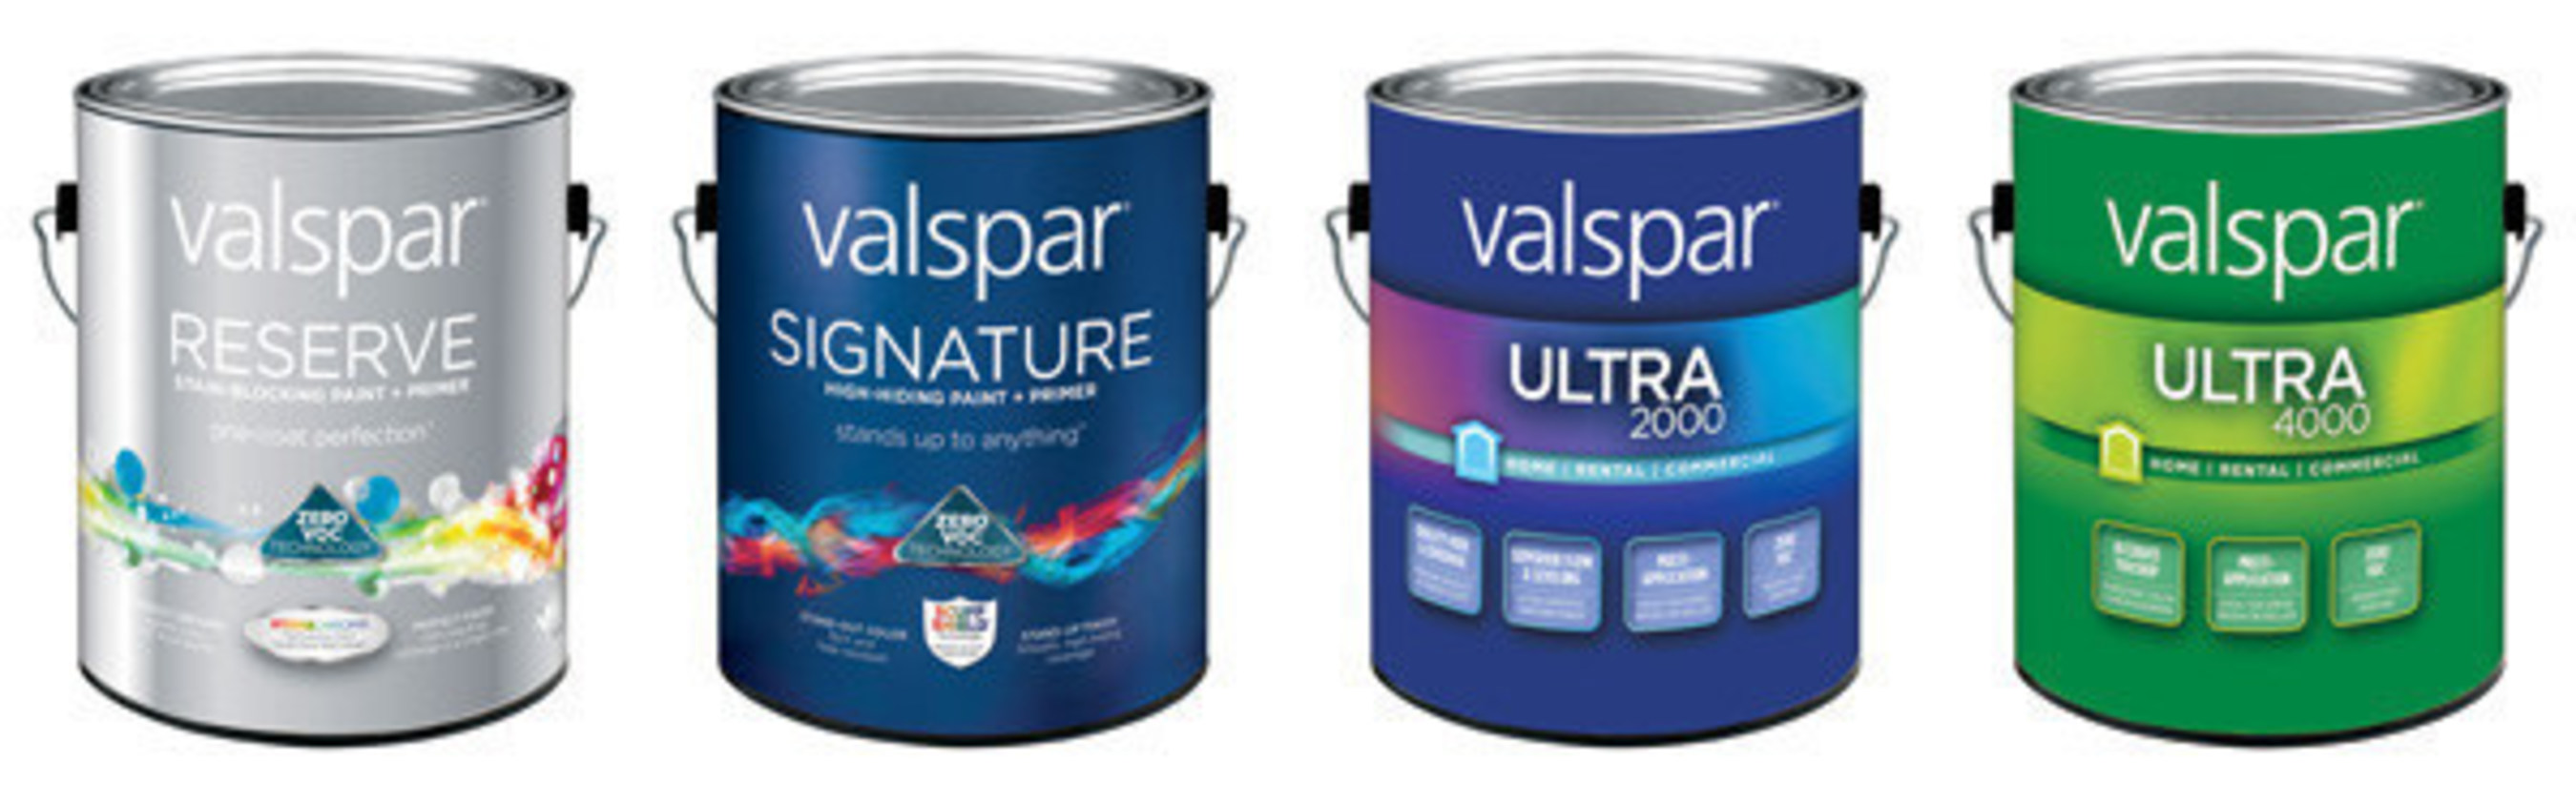 Breathe Easier With Valspar S Invigorated Paint Line At Lowe S